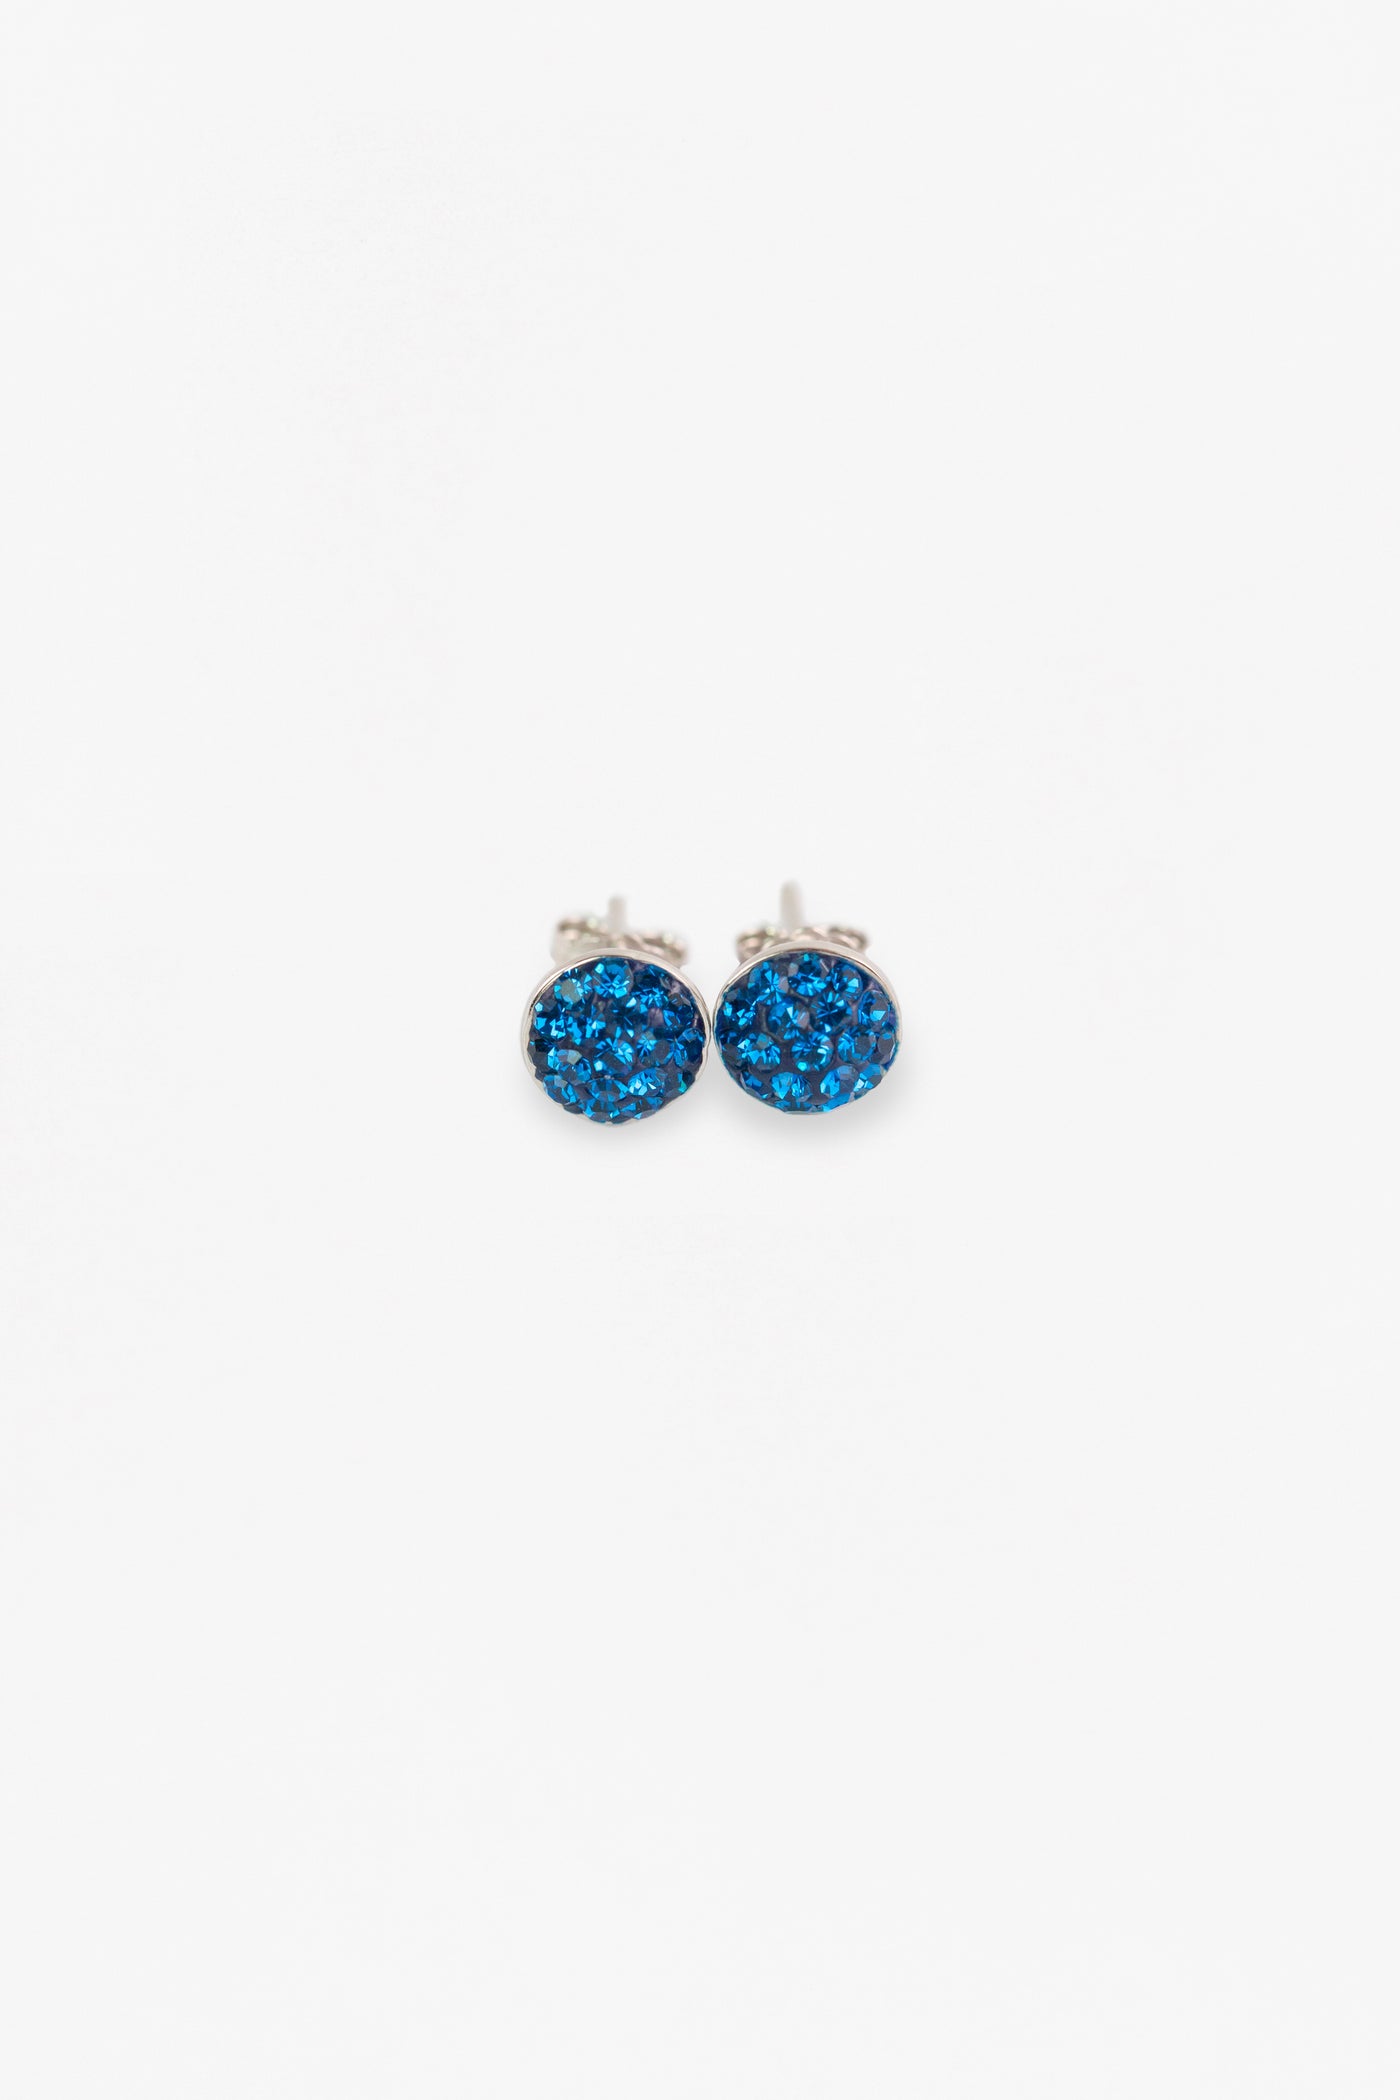 7mm Round Crystal Crystal Sterling Silver Stud Earrings in Capri Blue | Annie and Sisters